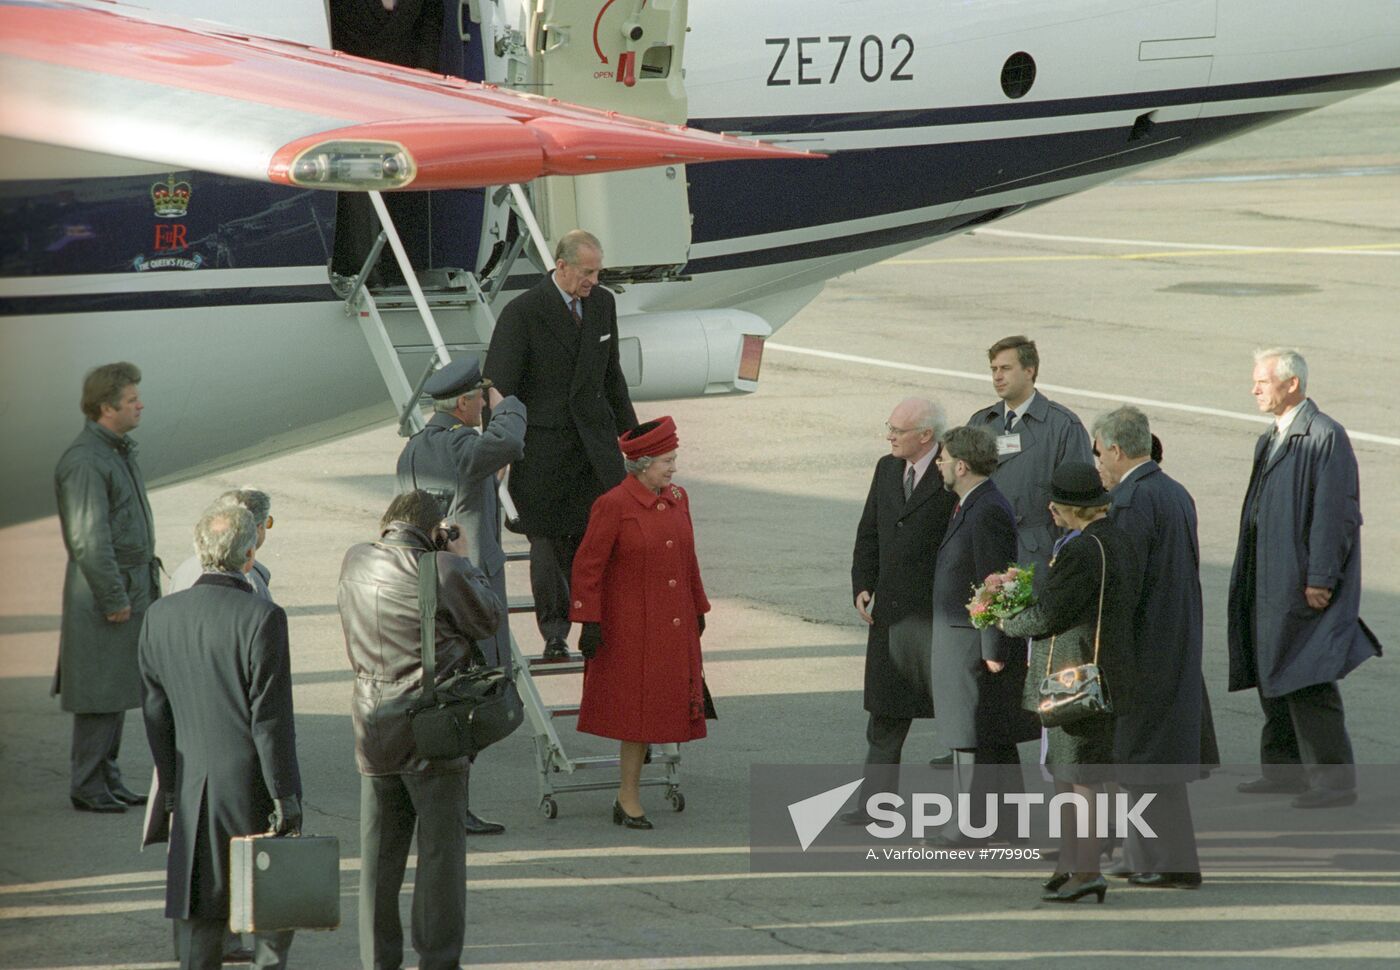 Red carpet welcome of Queen Elizabeth II and Prince Philip